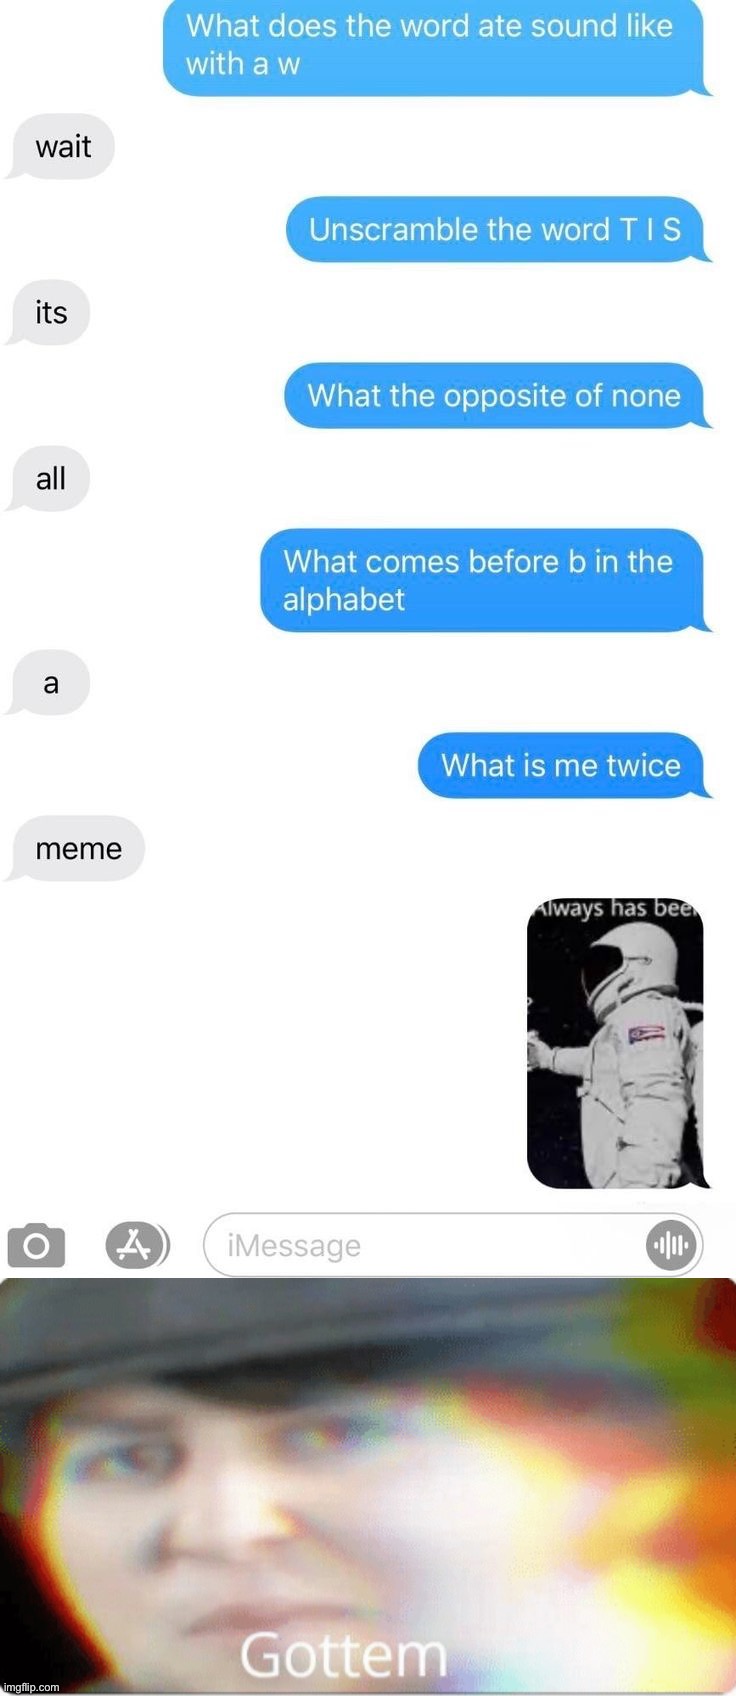 Gottem | image tagged in gottem,memes,funny,genius,smart,texts | made w/ Imgflip meme maker